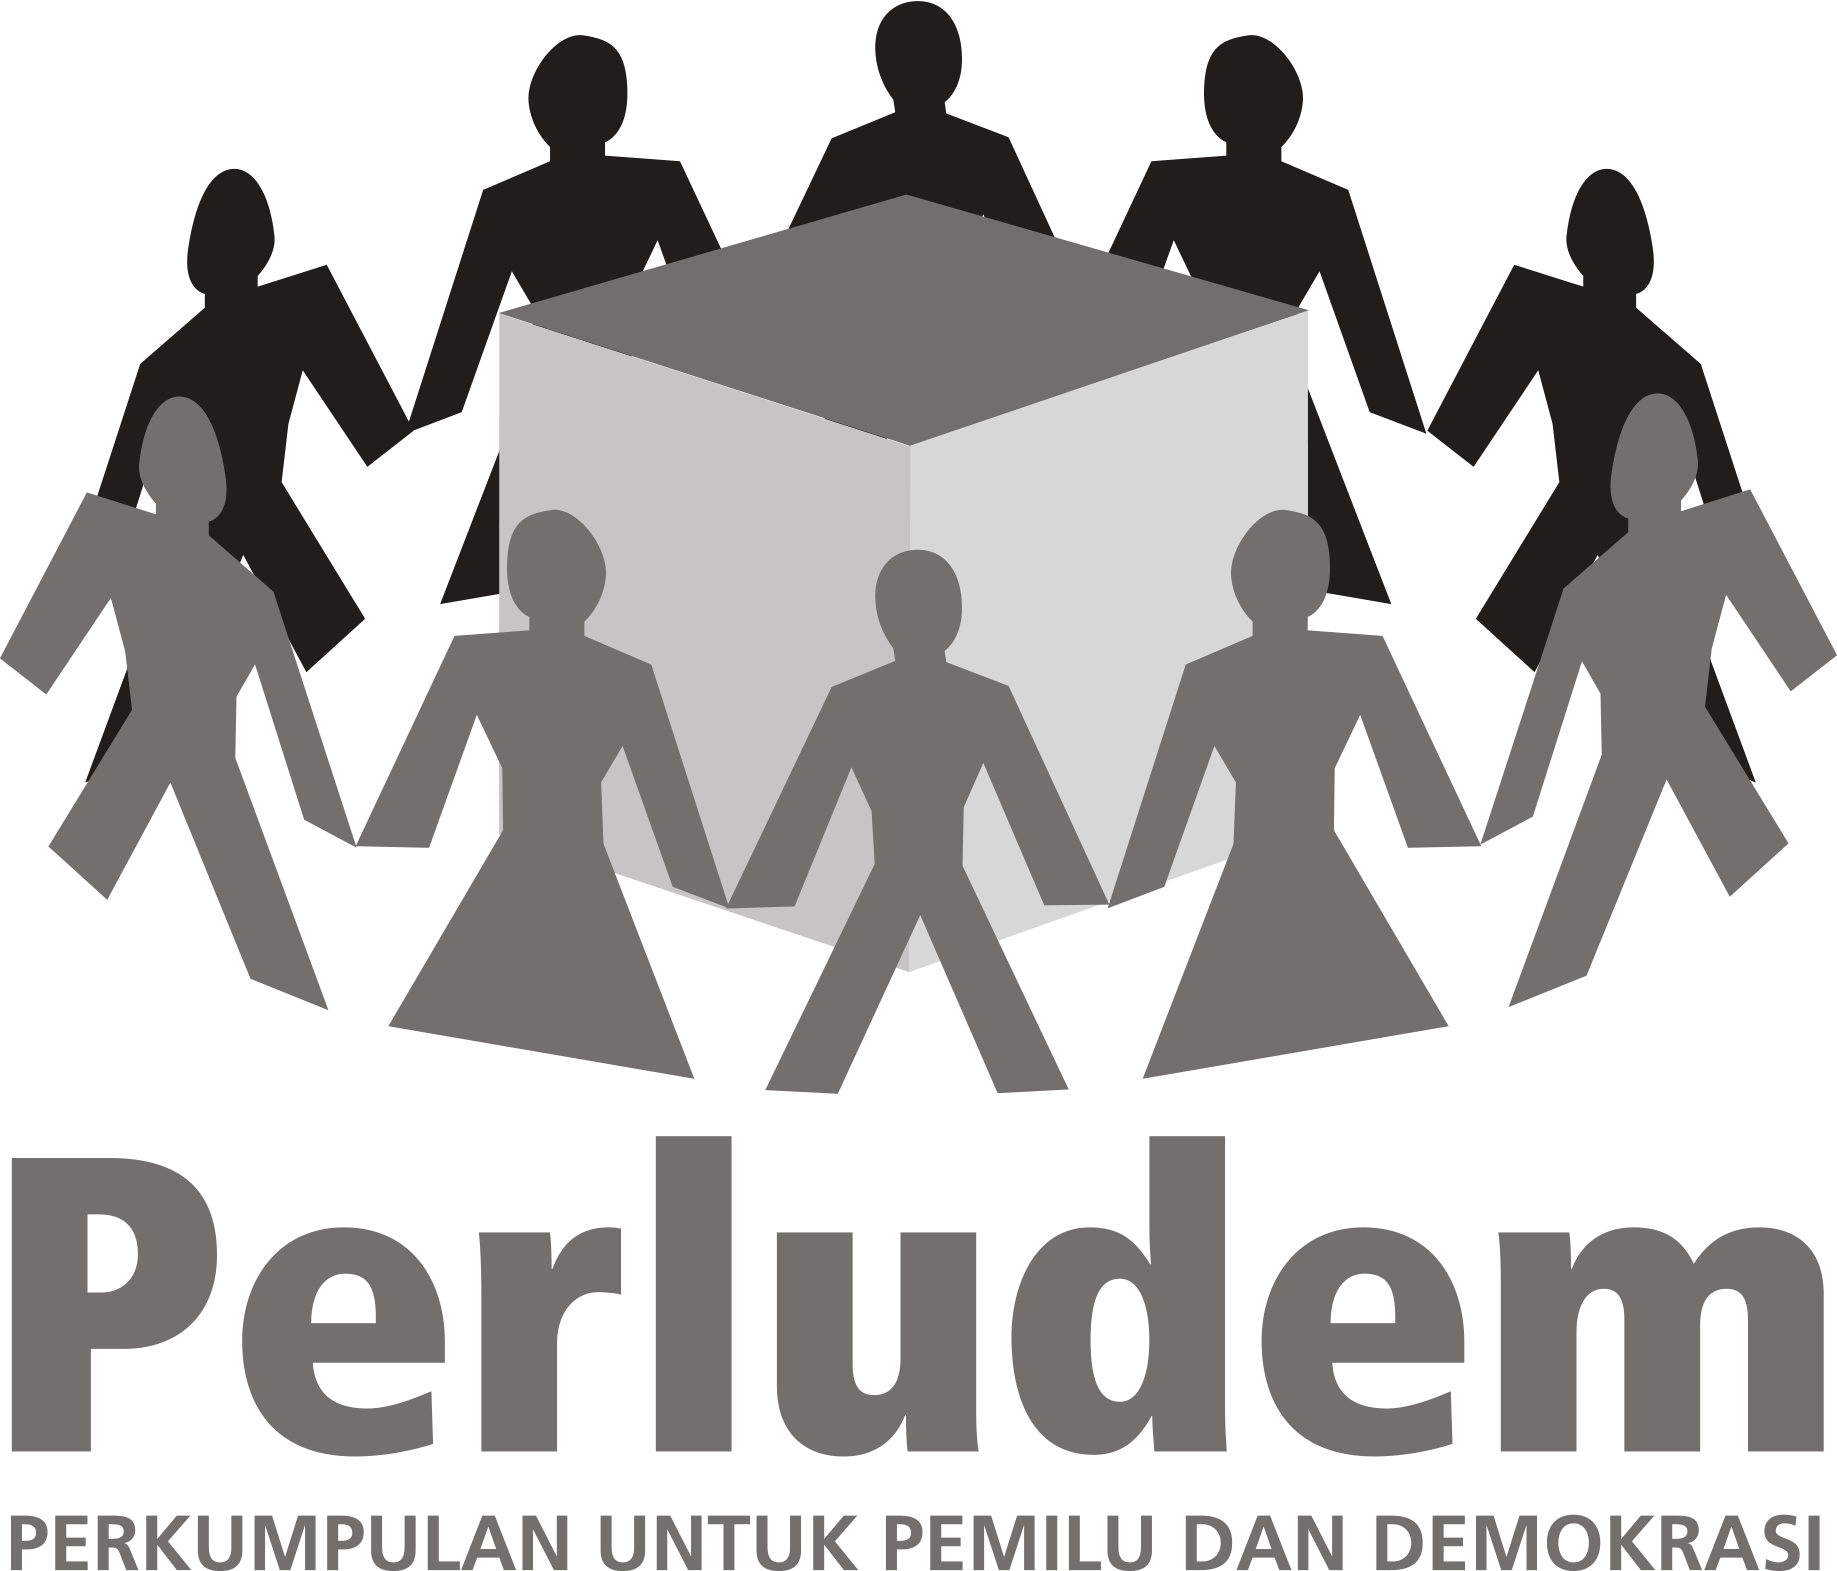 Perludem (Association for Elections and Democracy, Indonesia)